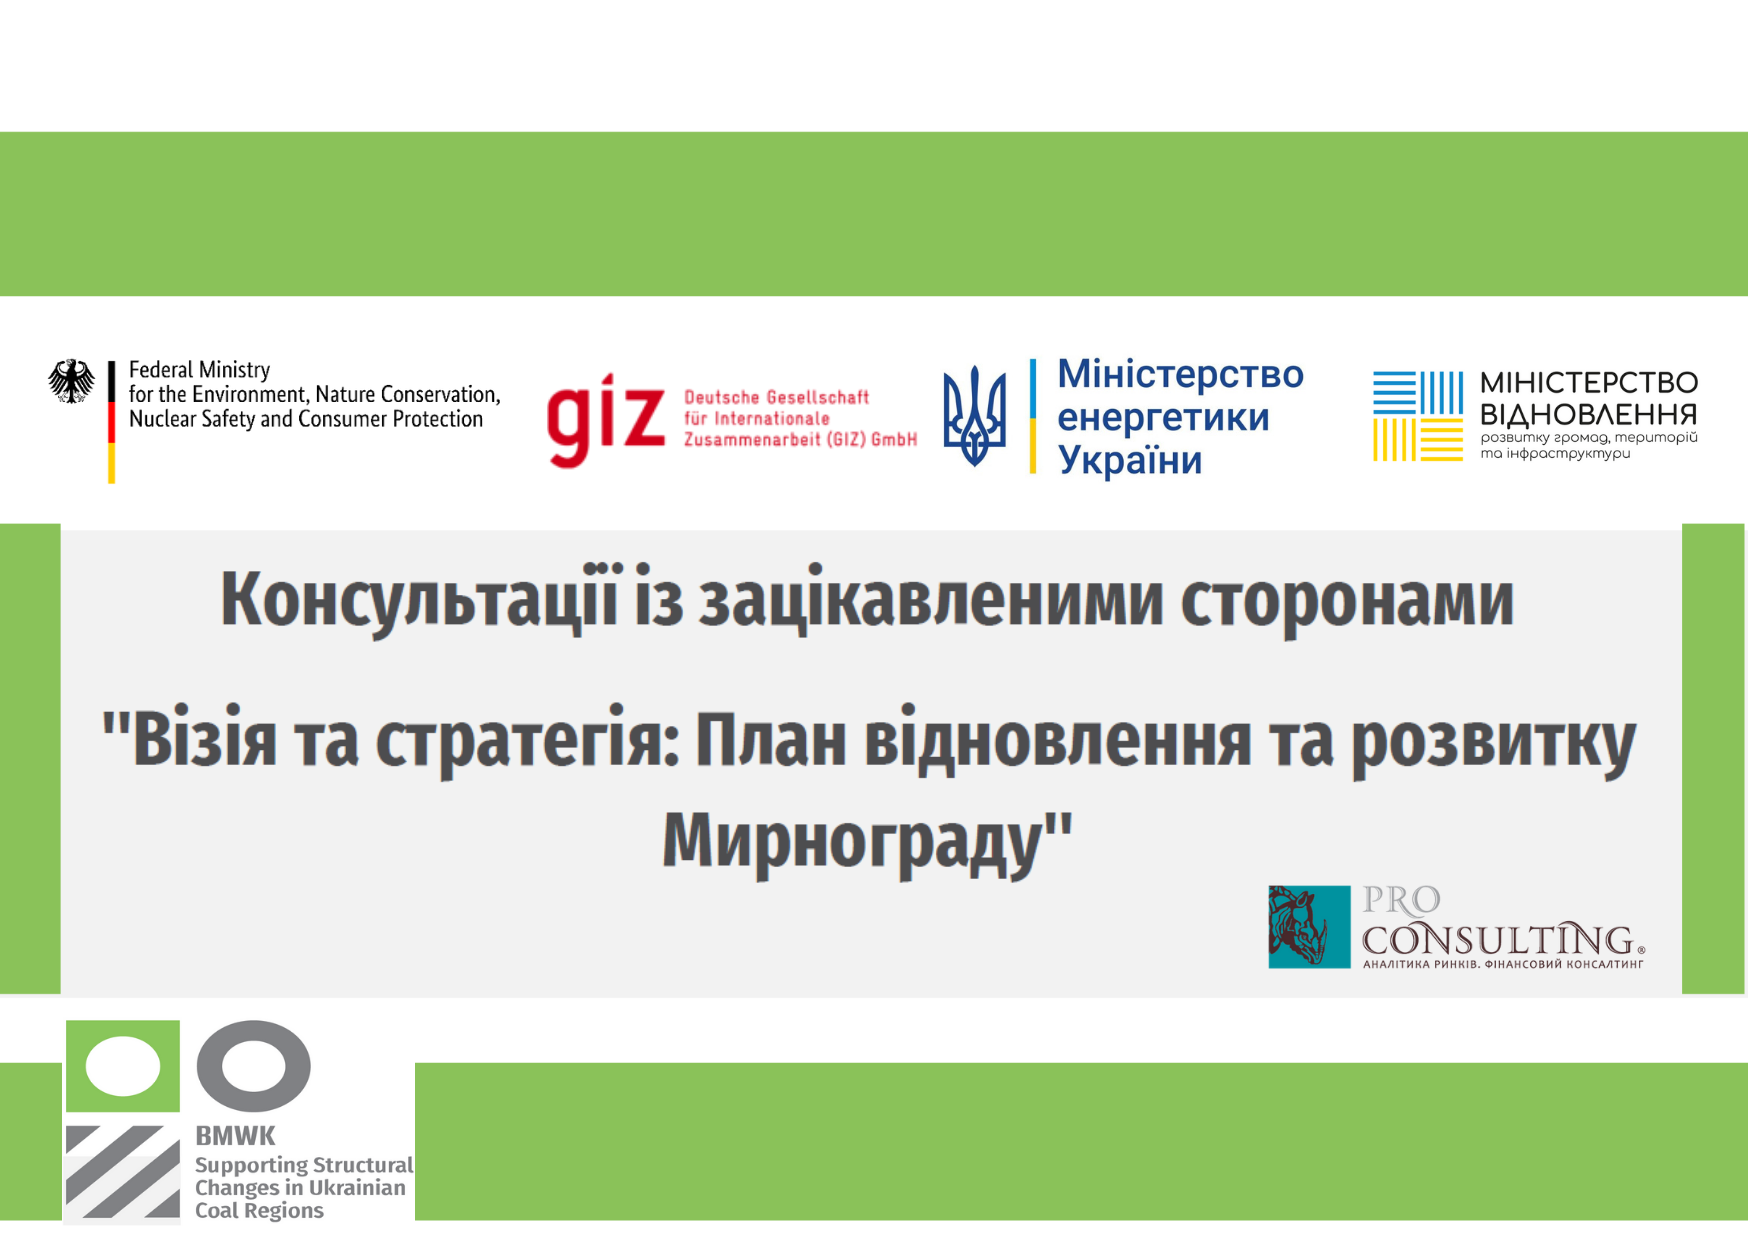 Pro-Consulting experts will take part in consultations for stakeholders “Vision and Strategy: Plan for the restoration and development of Myrnograd”